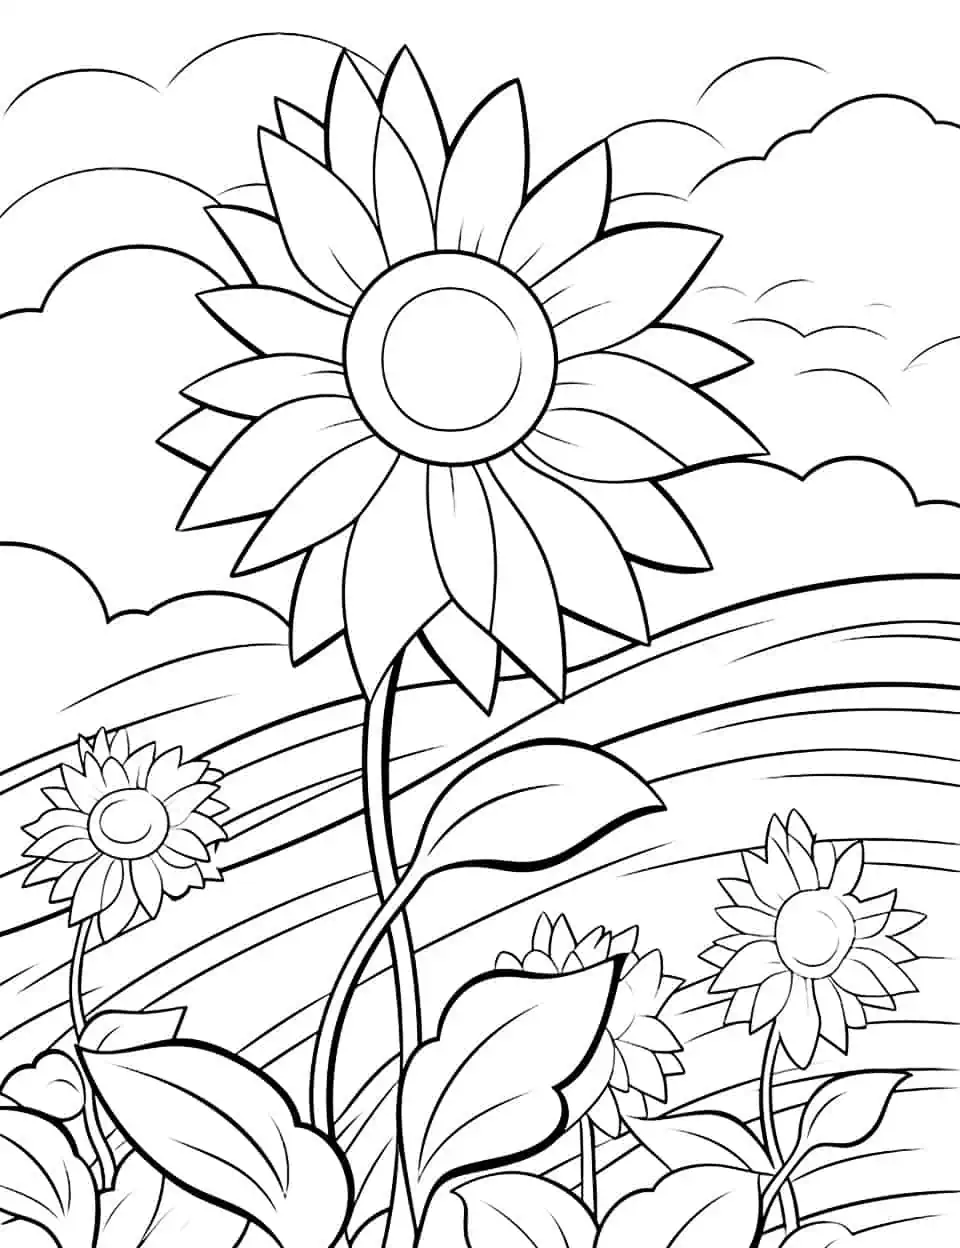 Sunflower Field in Spring Coloring Page - A large, simple coloring page featuring a field of sunflowers under a spring sun for younger kids.